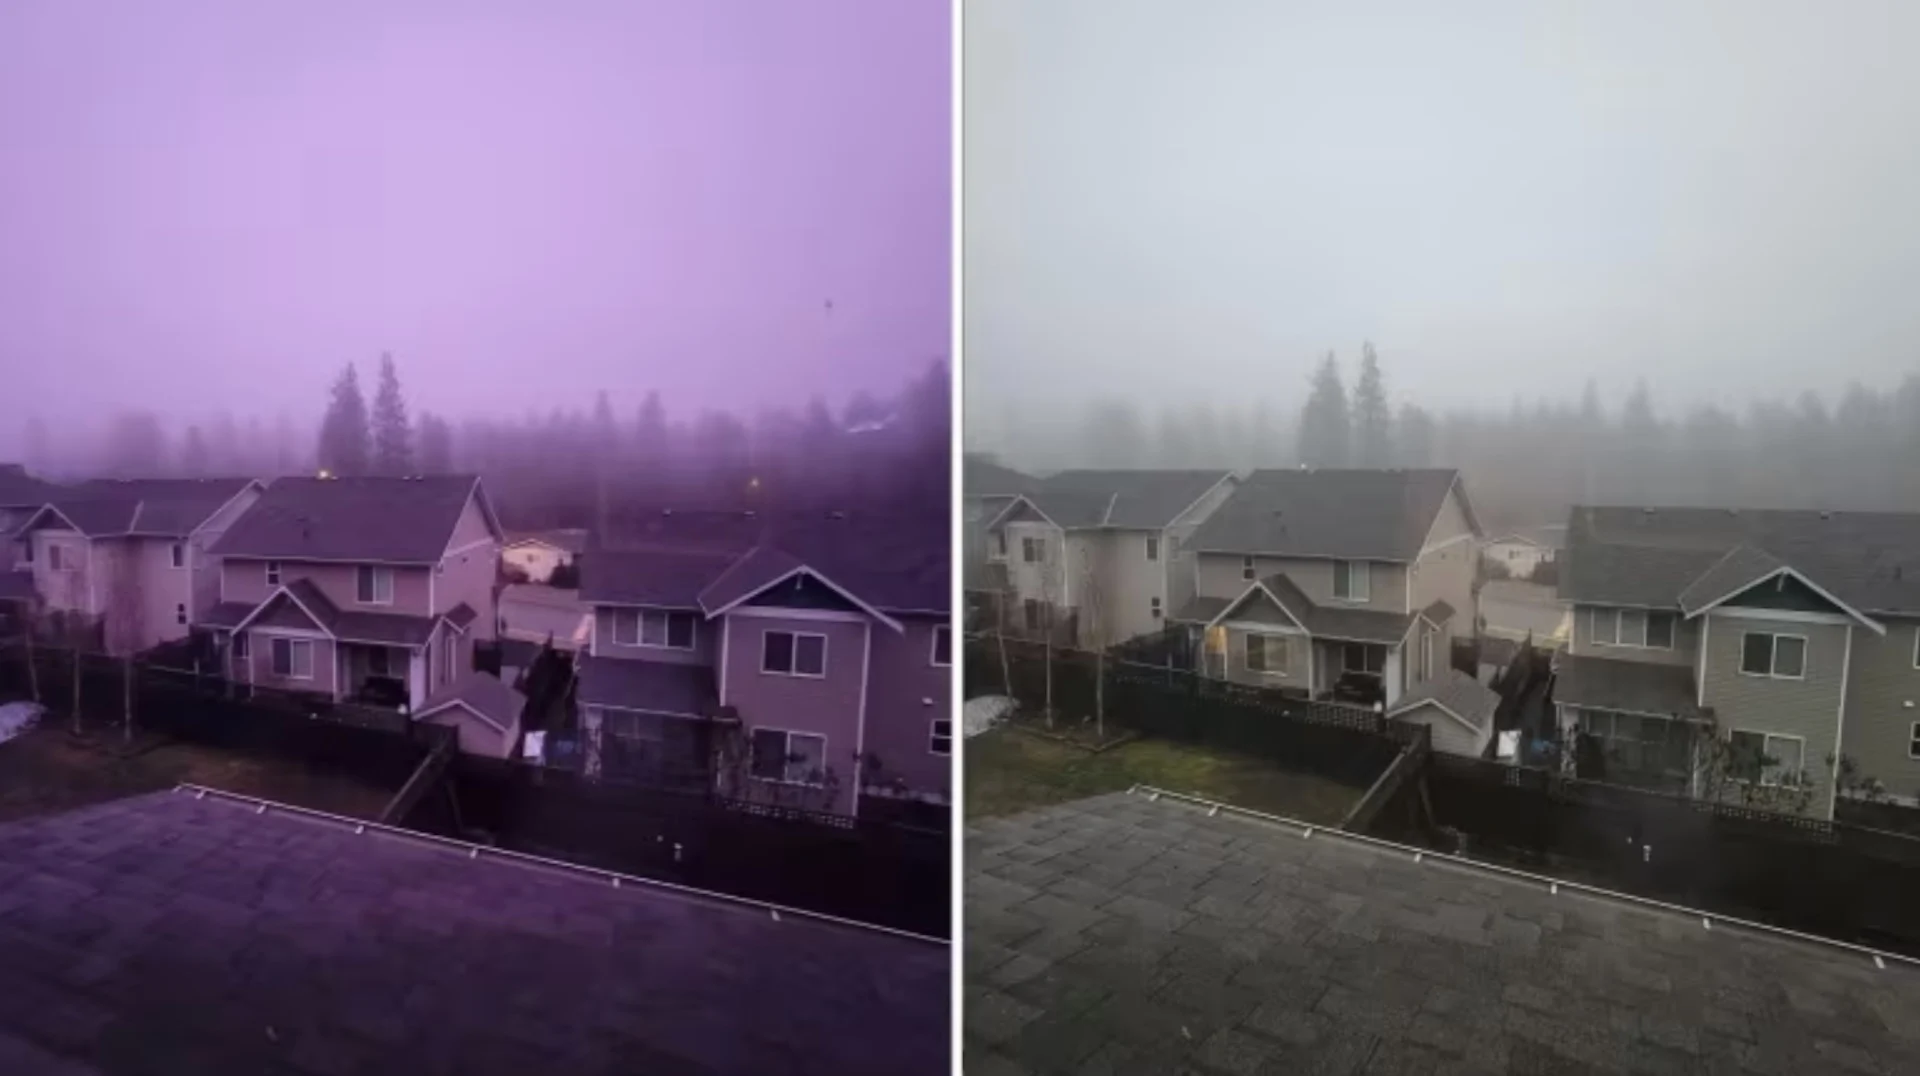 Purple haze, don't know why? Here's the science behind the colourful fog